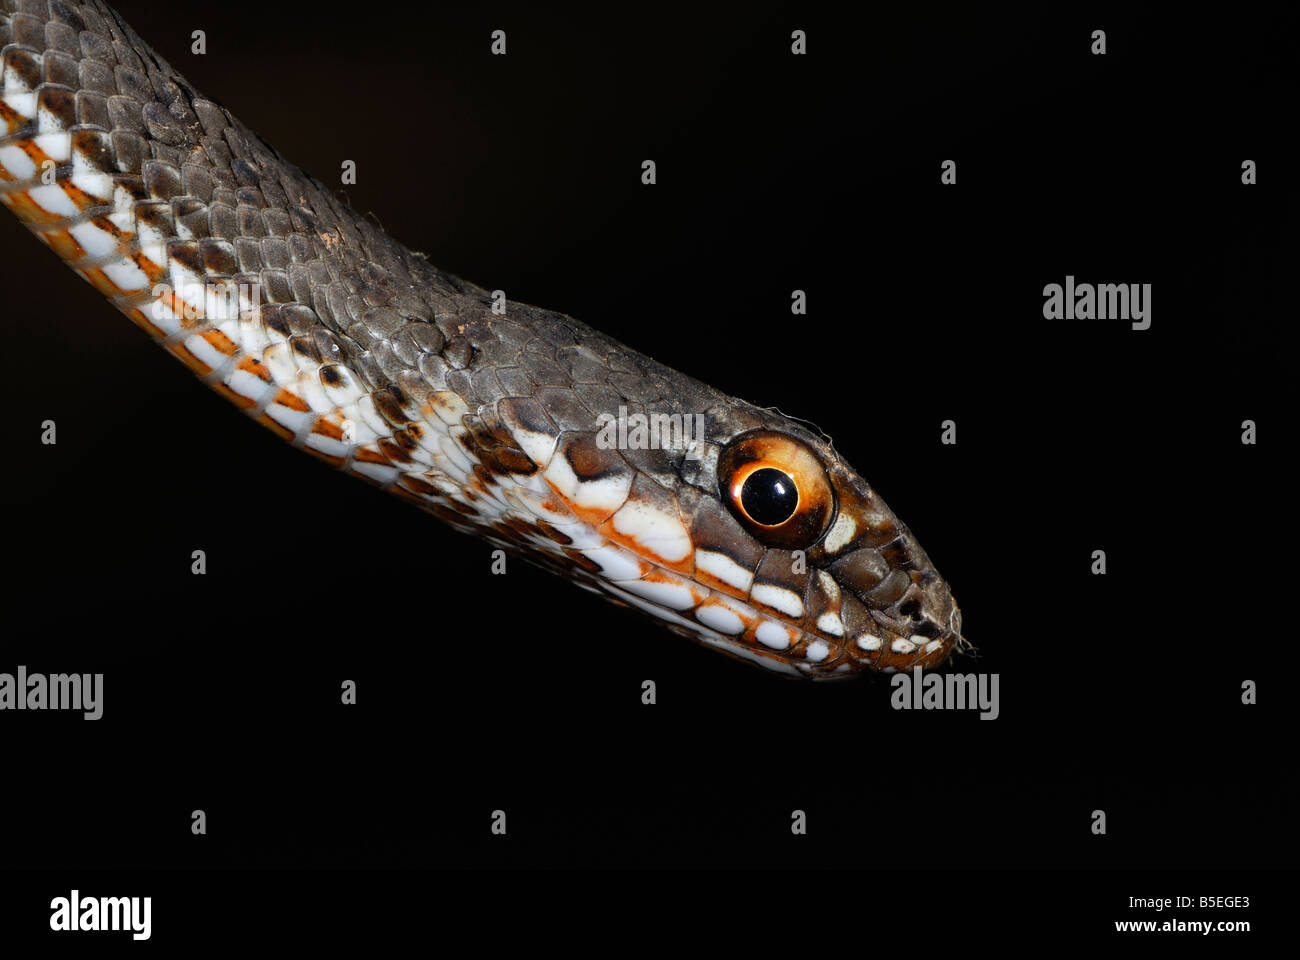 A juvenile Malpolon monspessulanus shows off its scales and colorful eyes Stock Photo